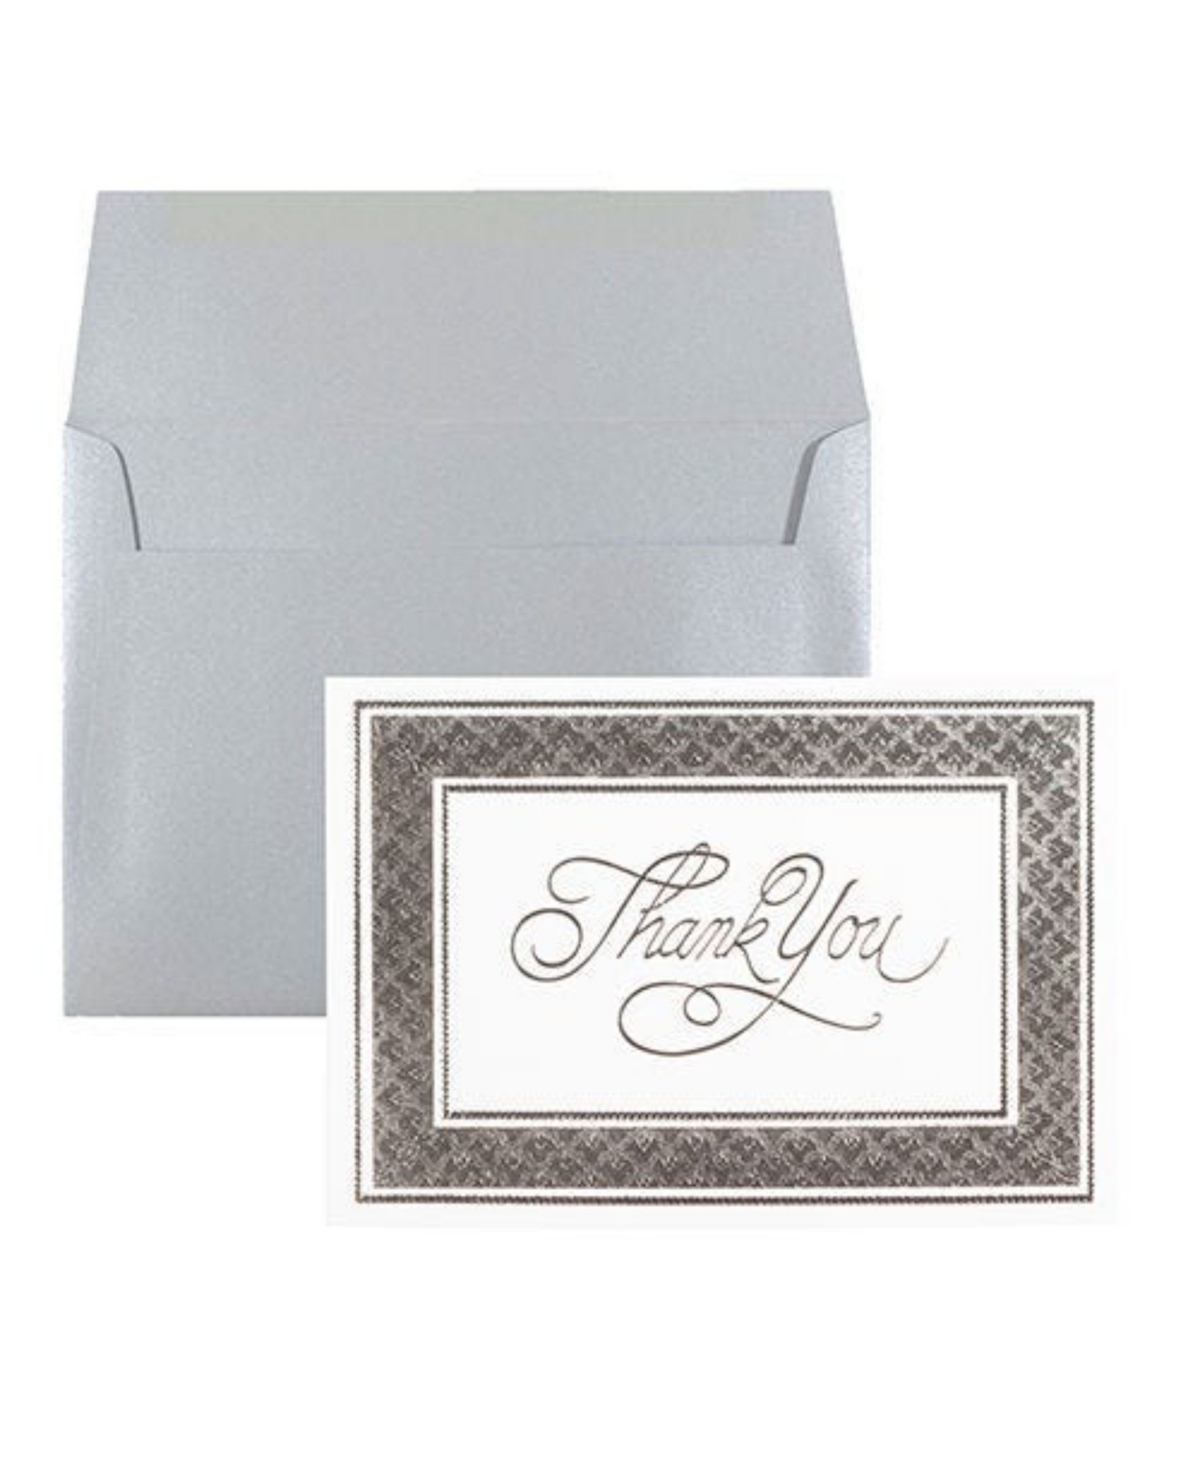 Jam Paper Thank You Card Sets In Silver Border Card With Silver Metallic